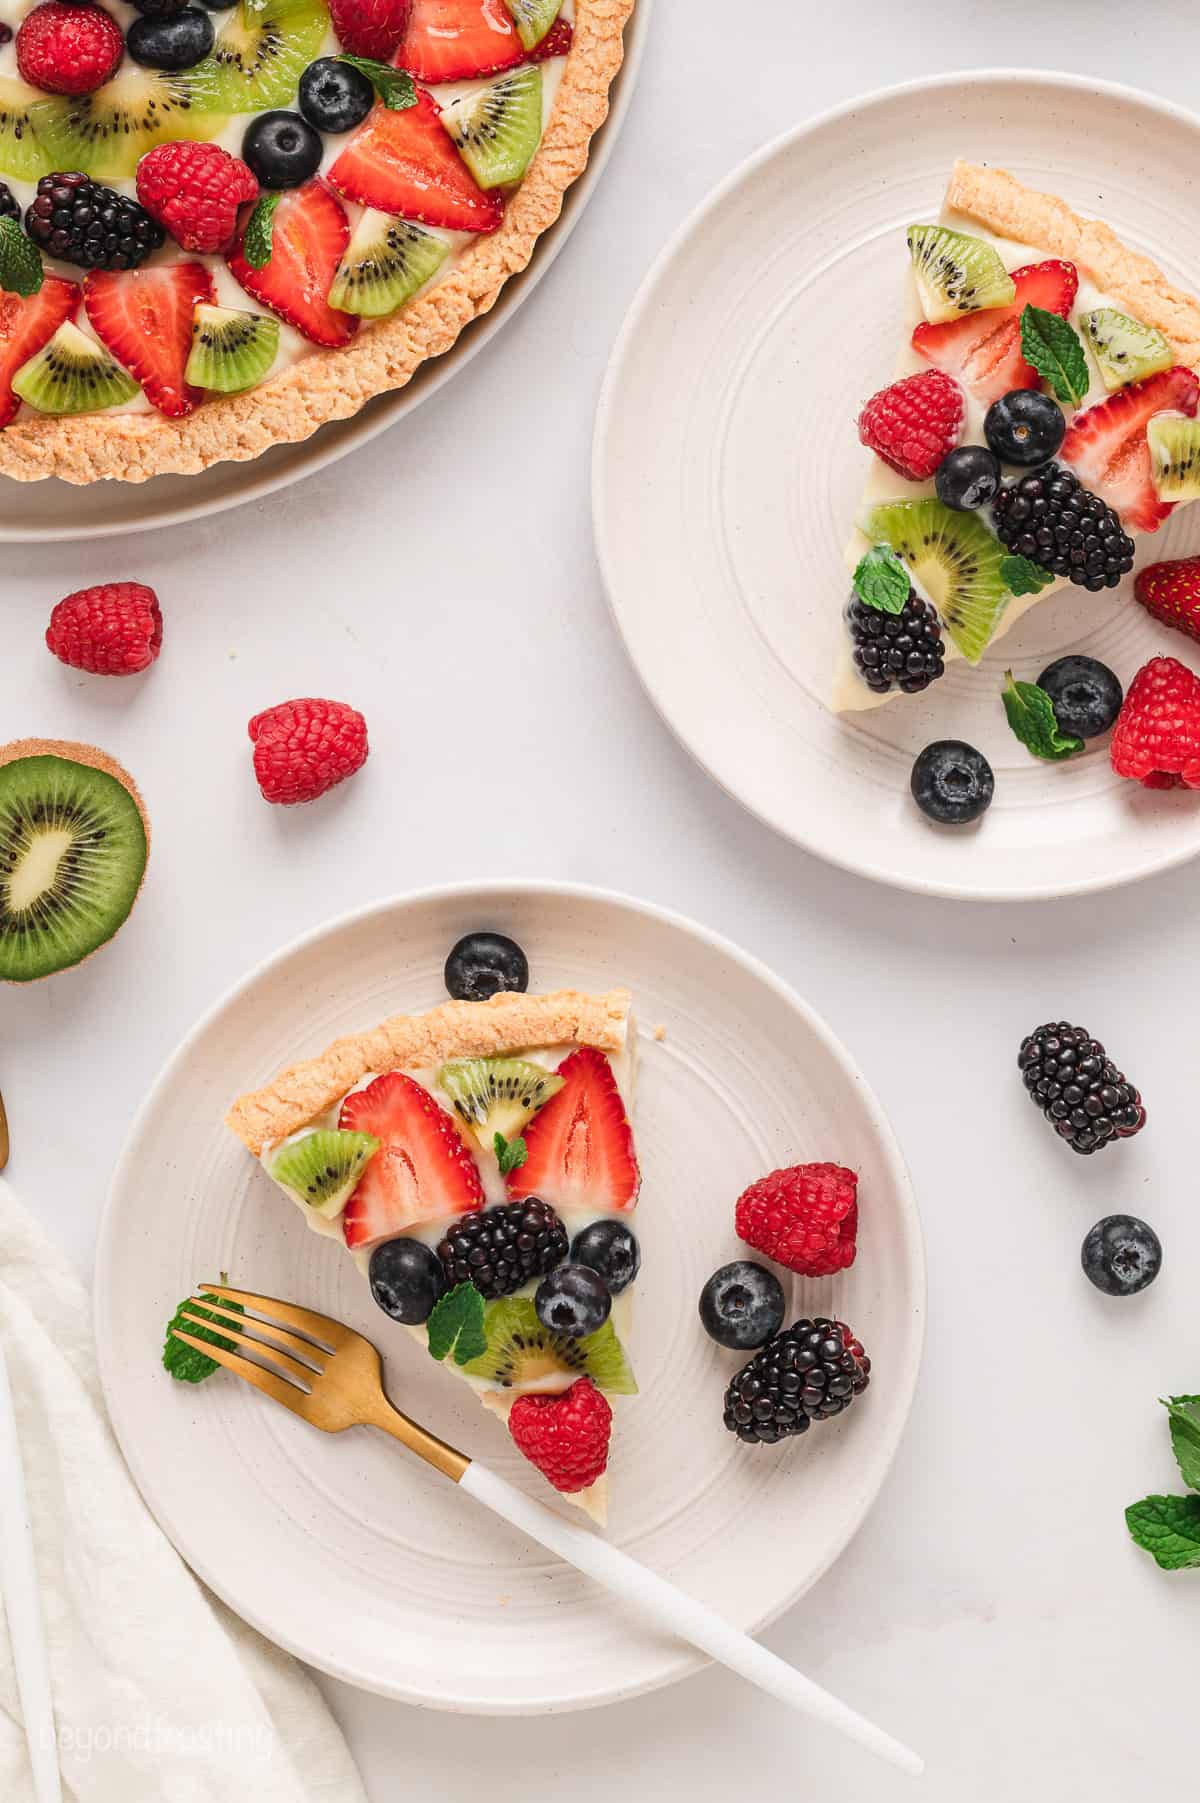 Overhead view of two slices of fruit tart served on white plates, next to the rest of the fruit tart on a countertop.